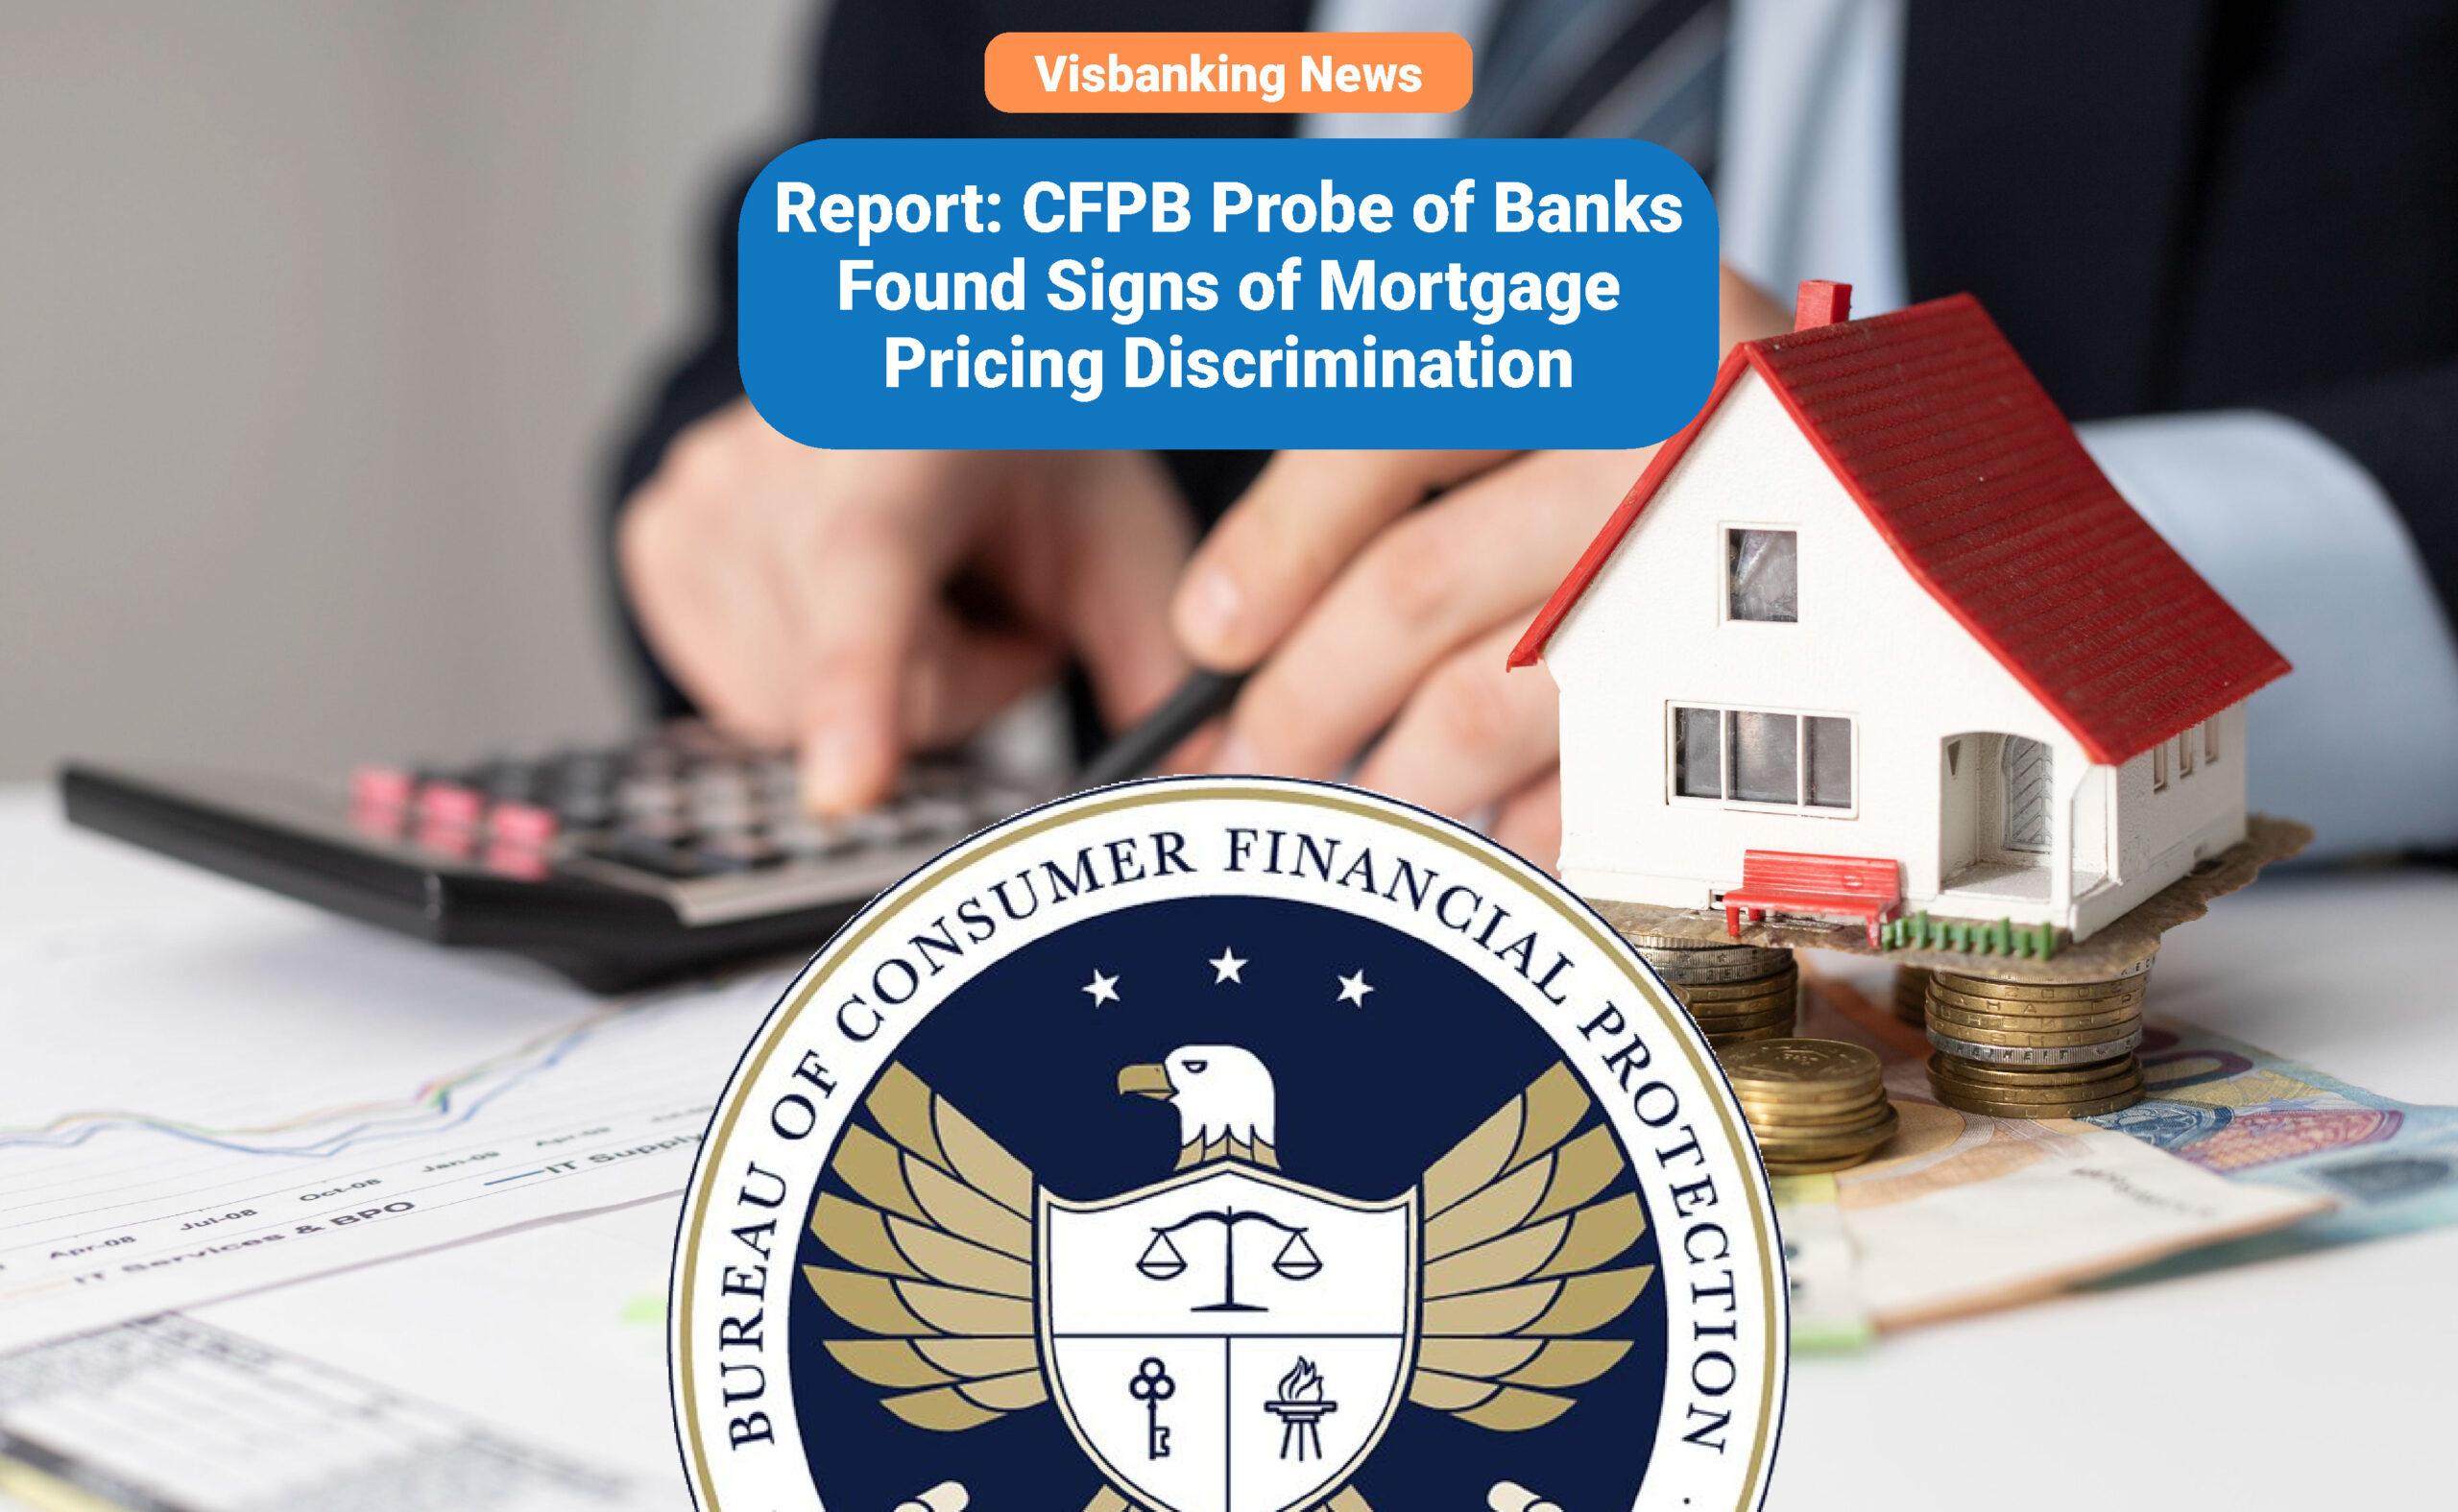 Report: CFPB Probe of Banks Found Signs of Mortgage Pricing Discrimination